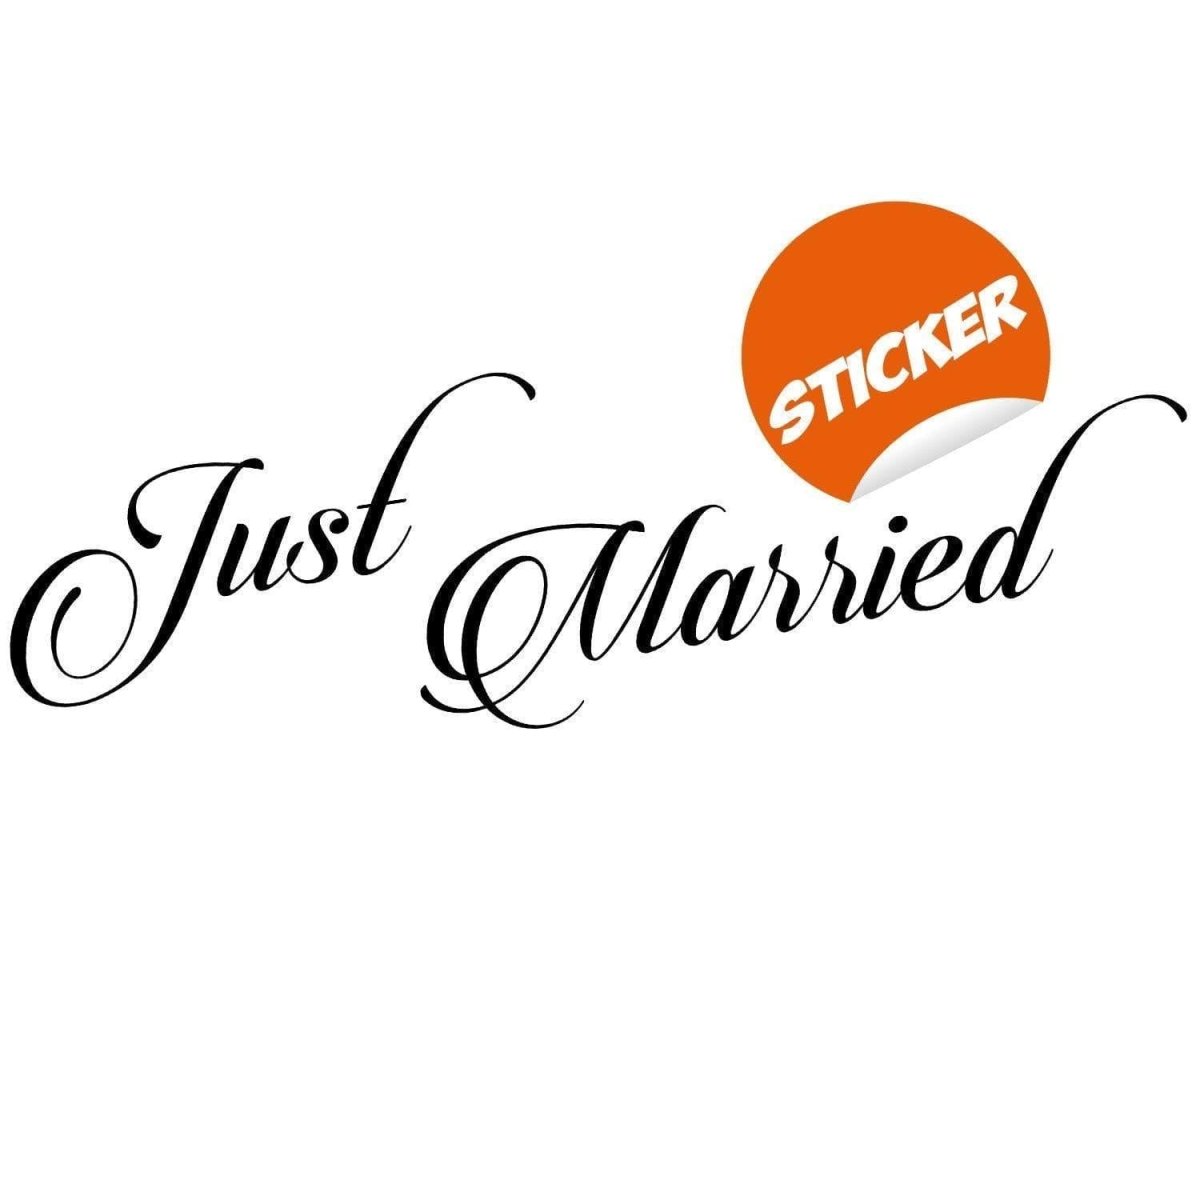 Chic Bridal Vehicle Sticker - Ideal for Wedding Day Car Decoration